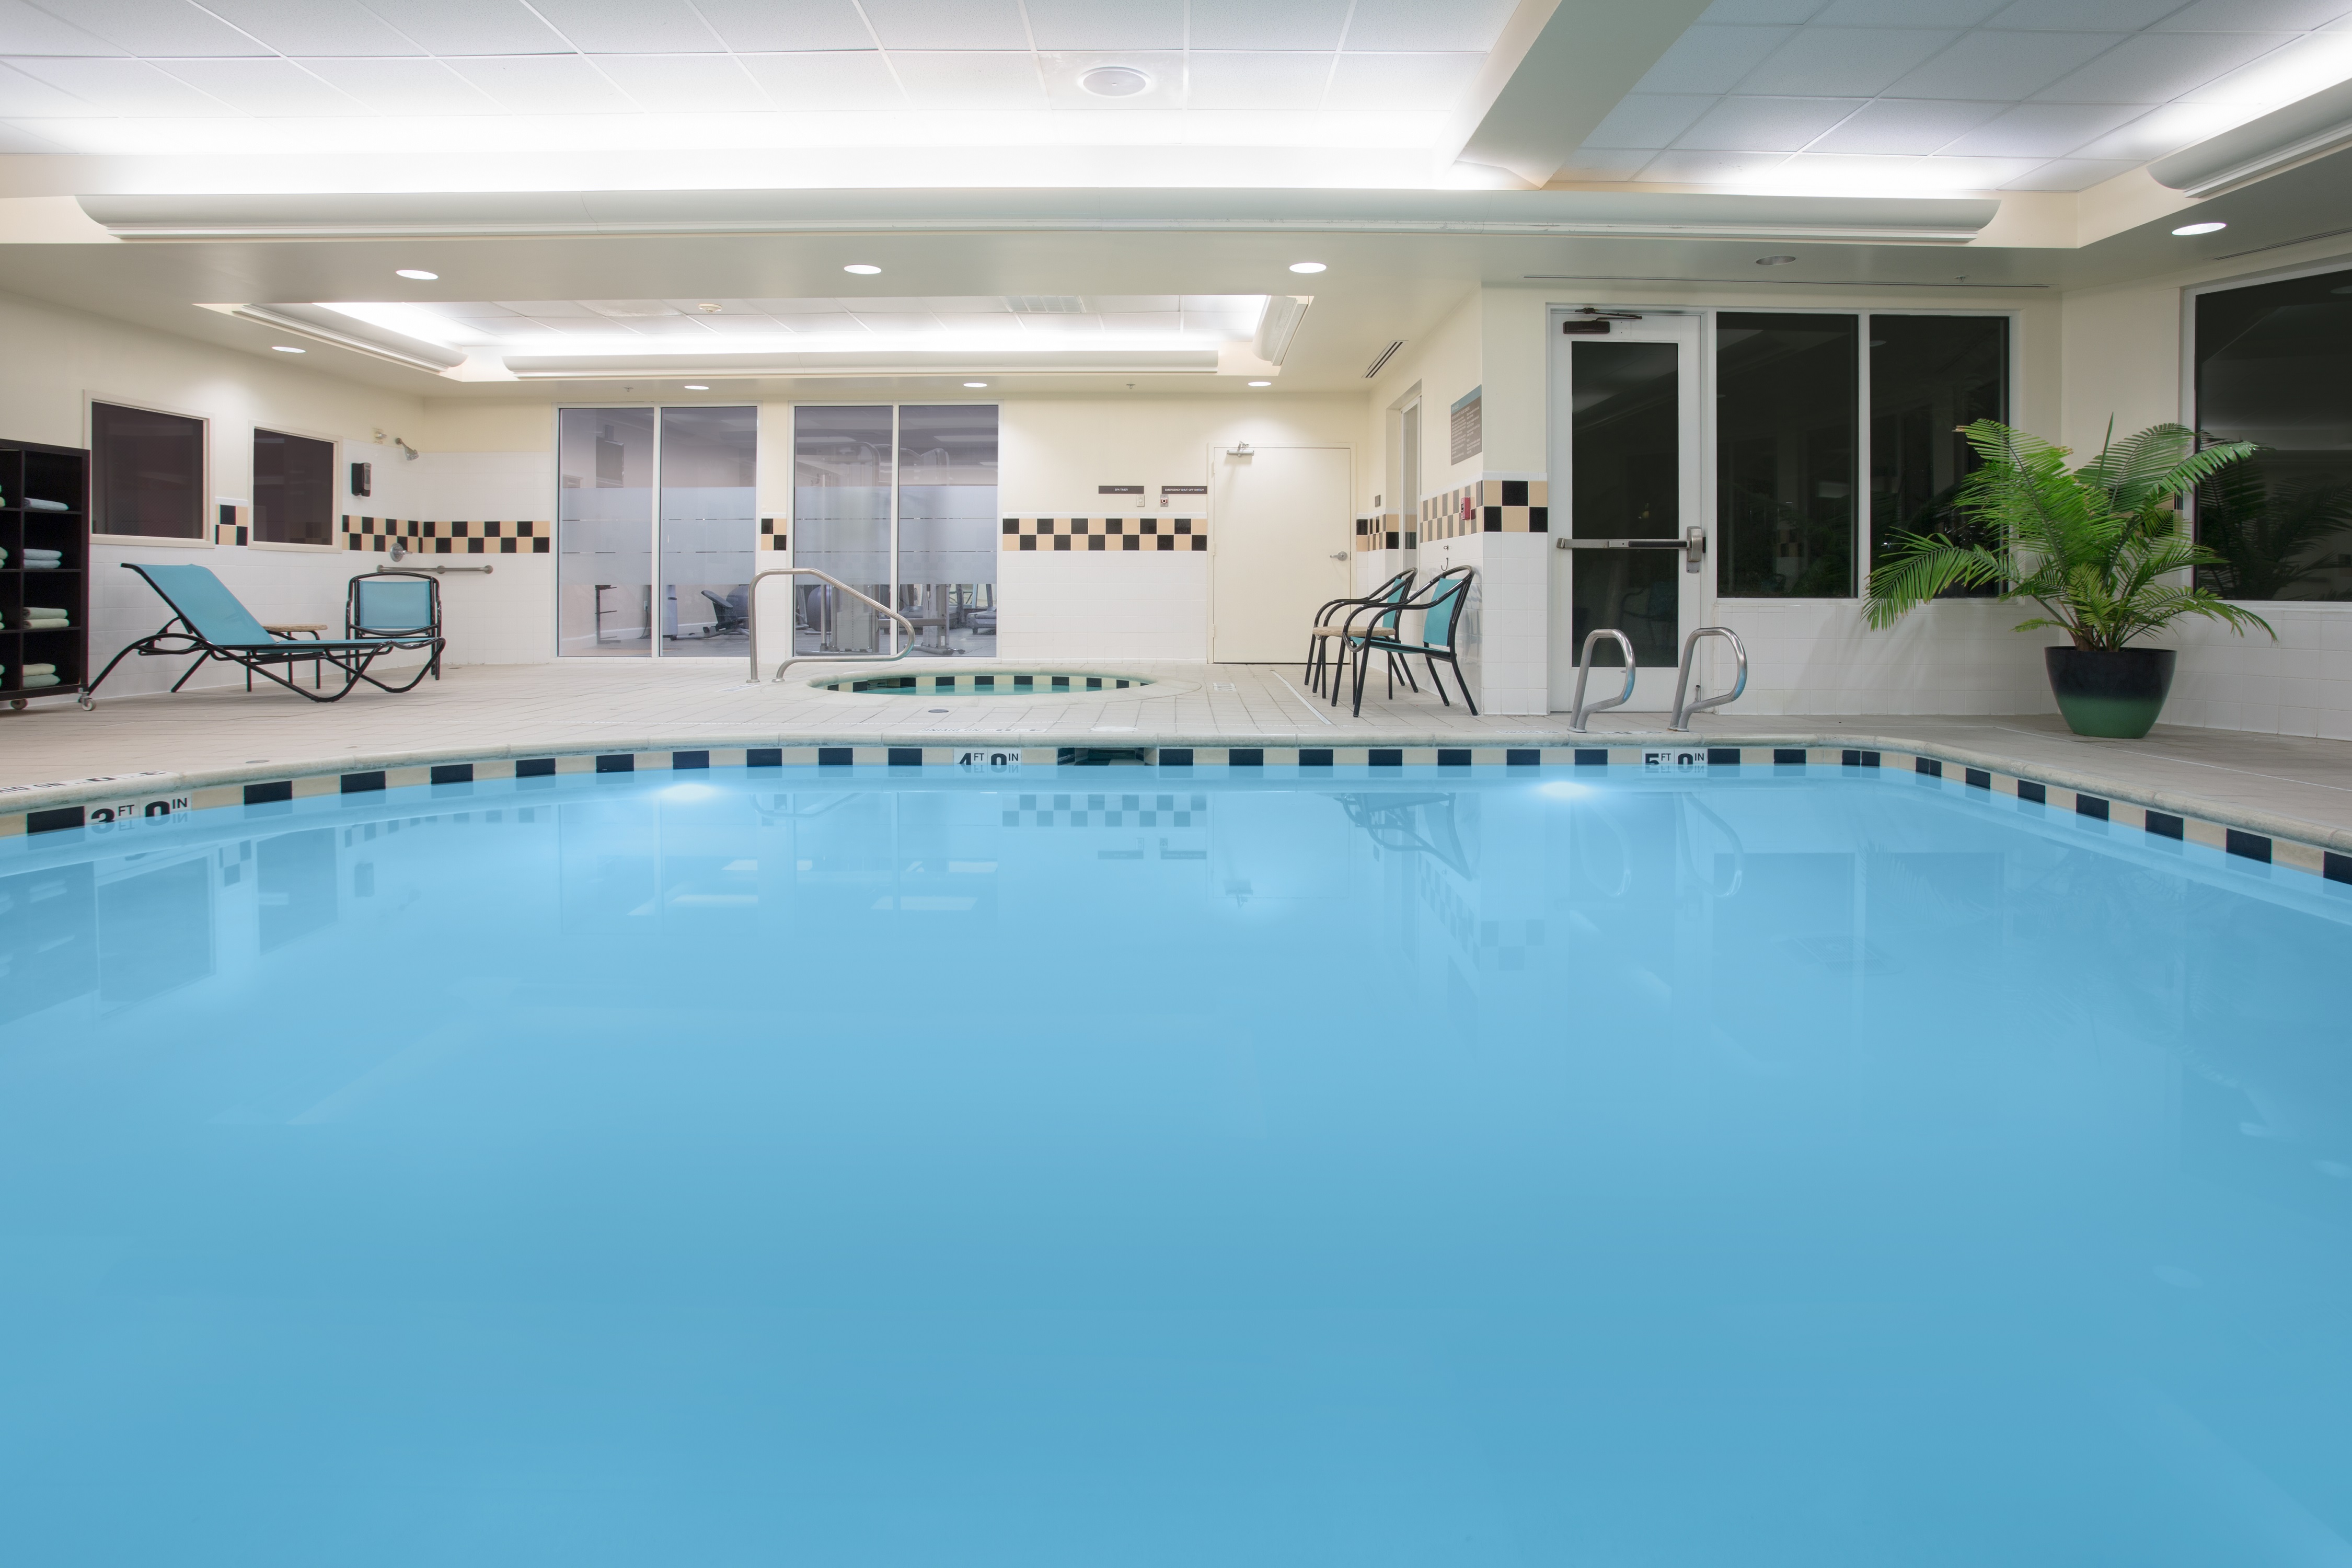 Indoor Pool with Chairs along Side